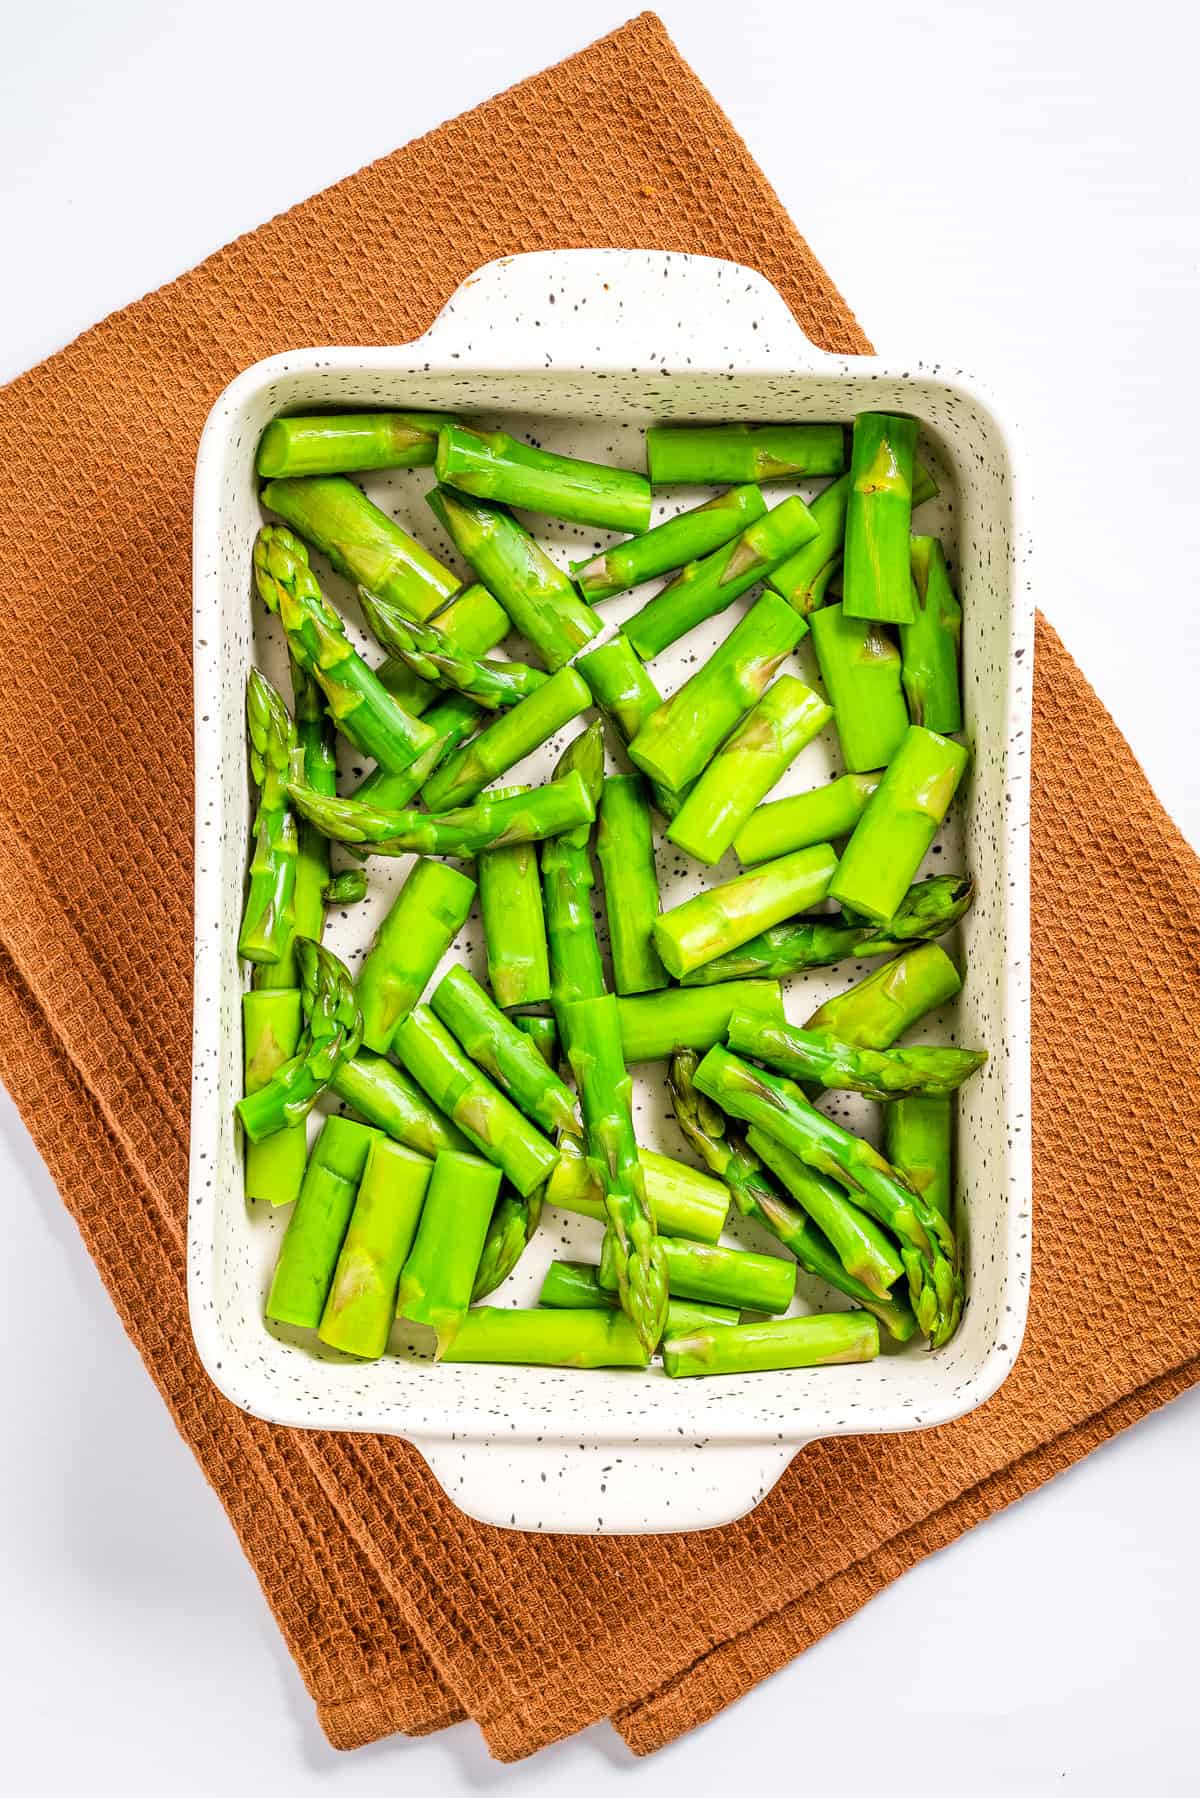 Overhead view of cooked asparagus placed in a baking dish.